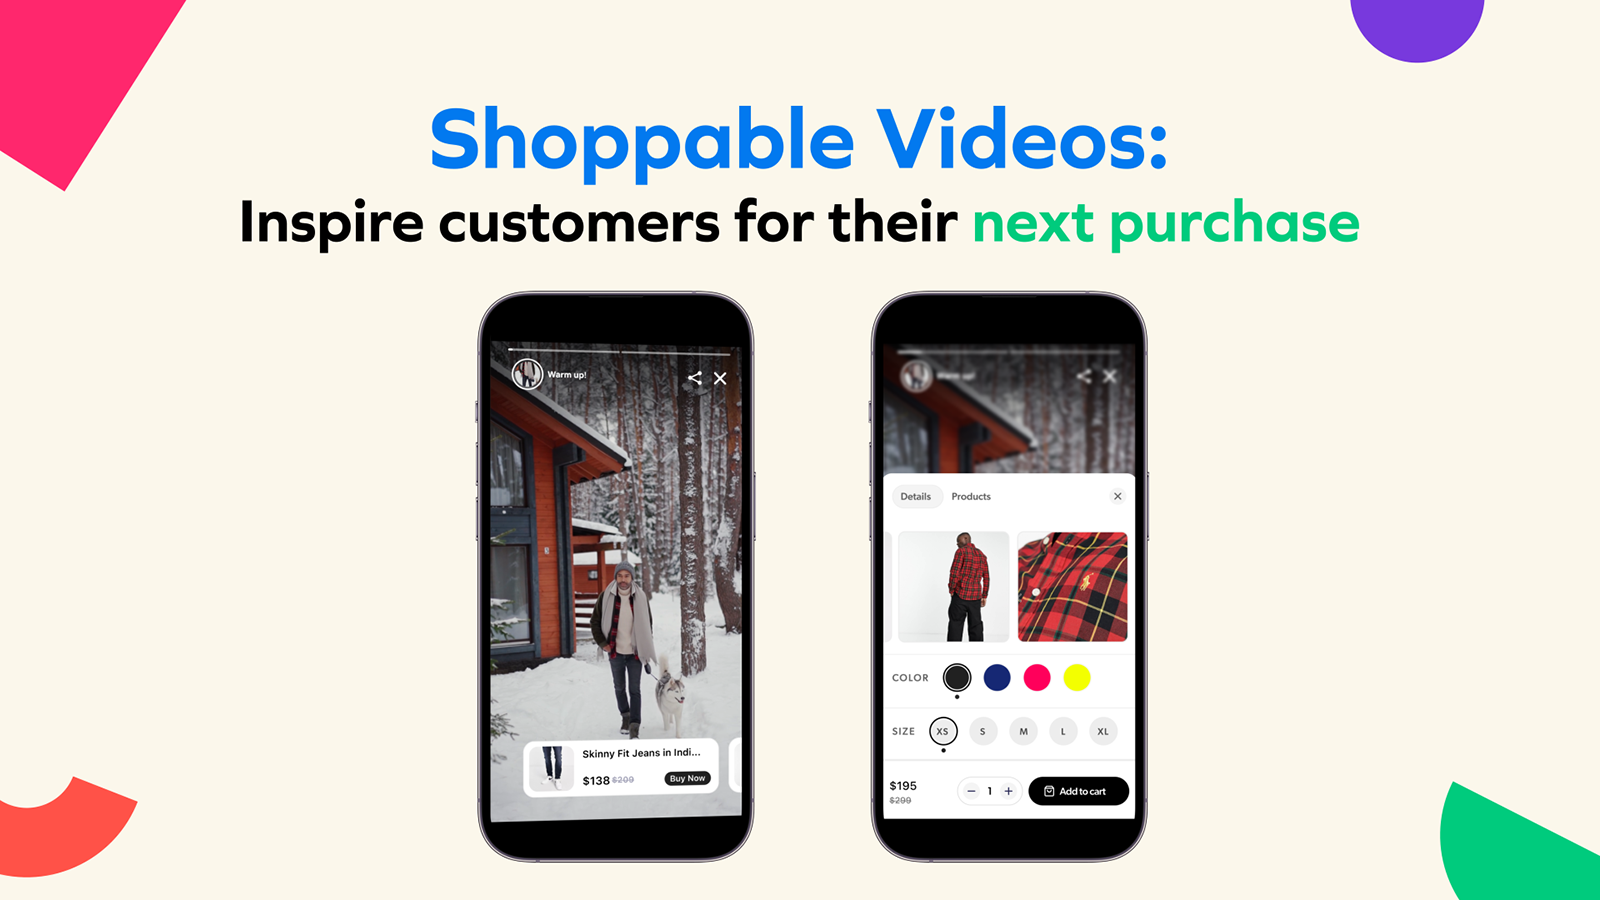 This image shows the benefit of shoppable videos